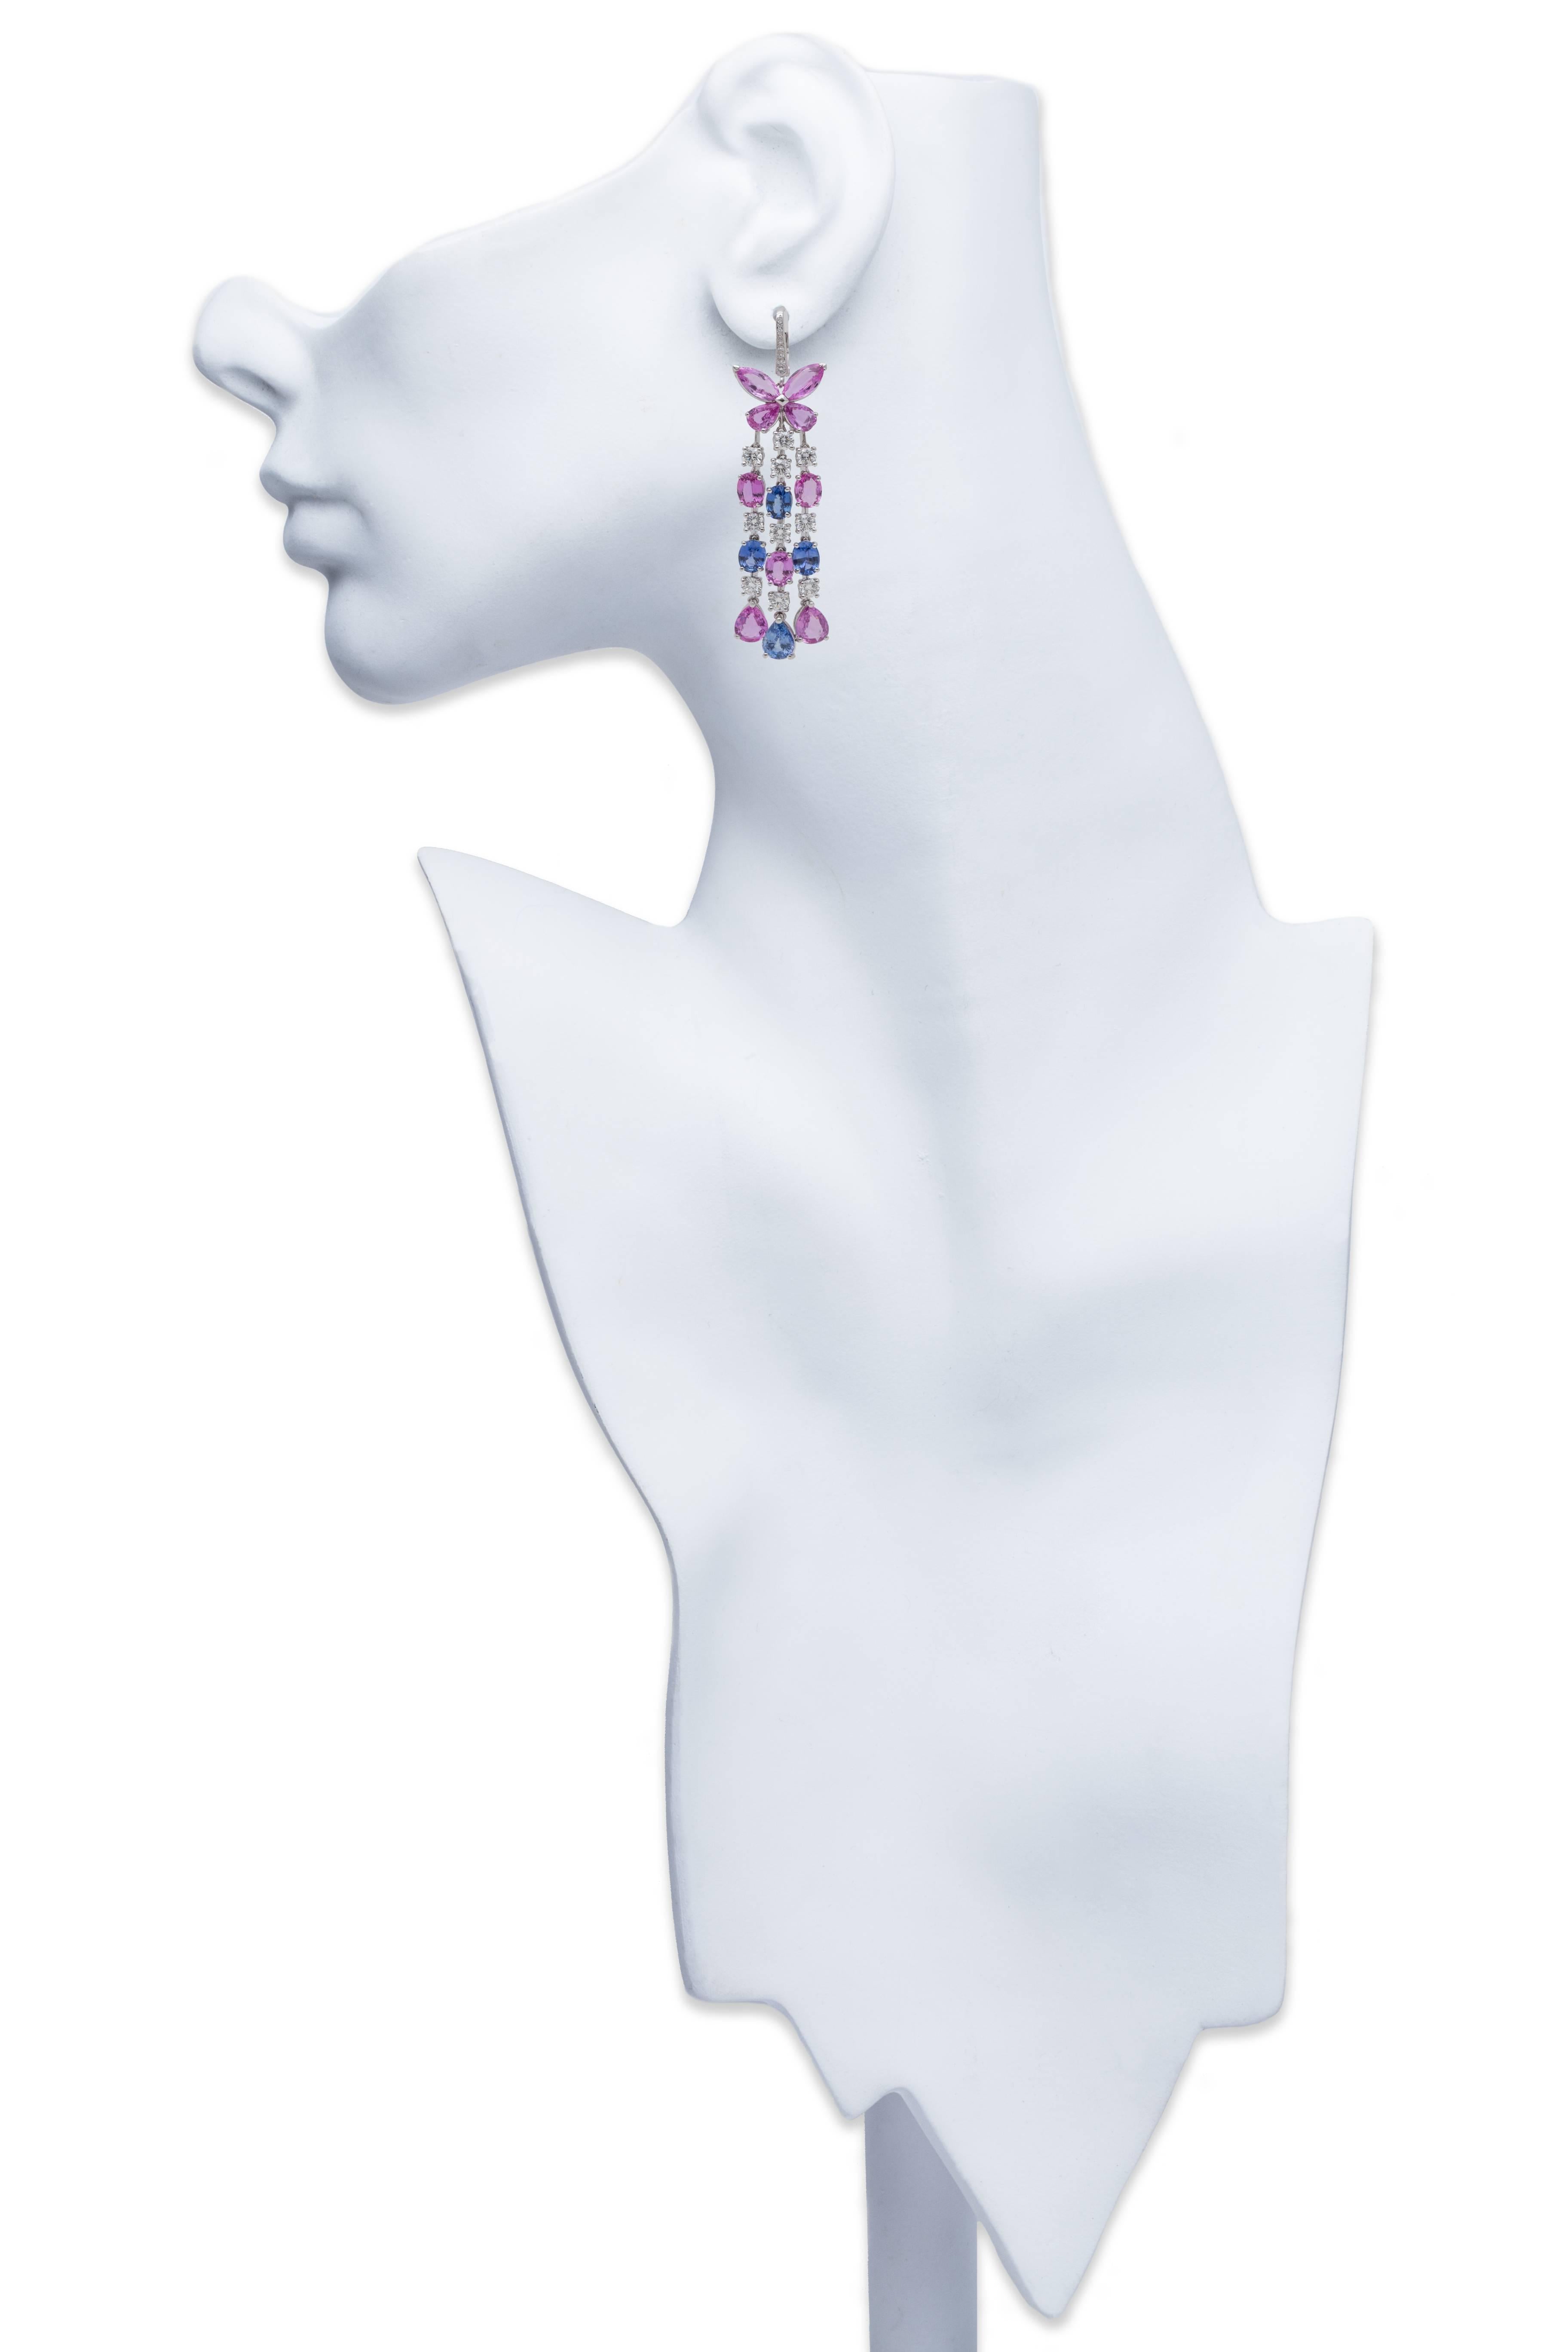 Graff Earrings with Diamonds, Pink, and Blue Sapphires in 18K White Gold. Earrings Length 2.75